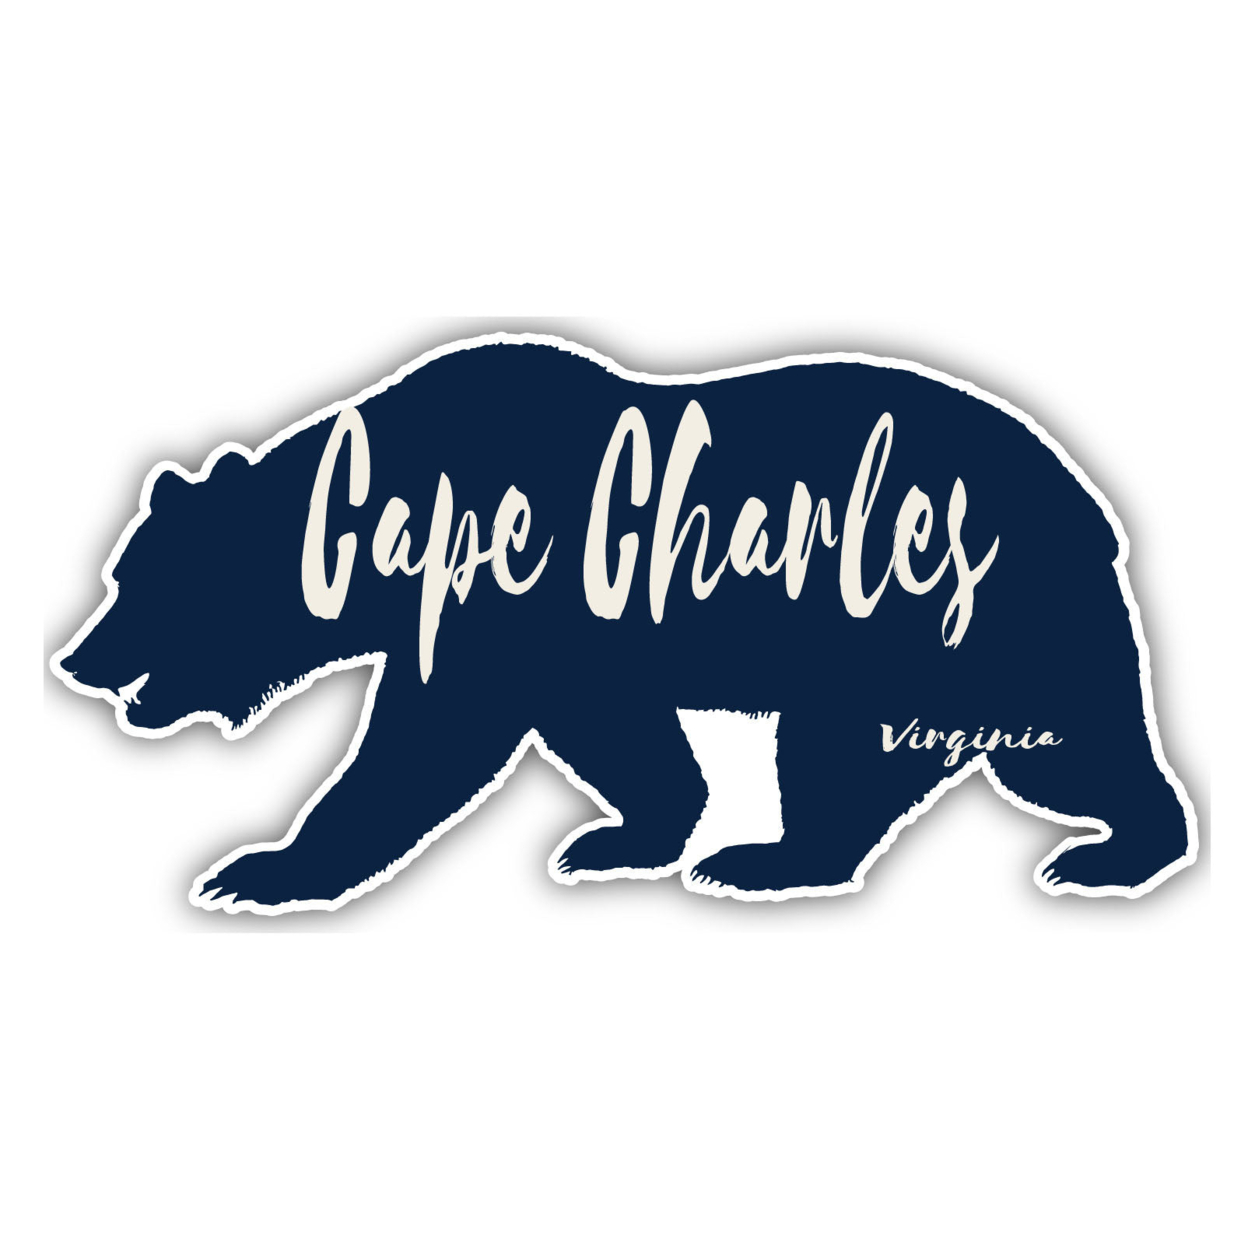 Cape Charles Virginia Souvenir Decorative Stickers (Choose Theme And Size) - 4-Pack, 4-Inch, Bear